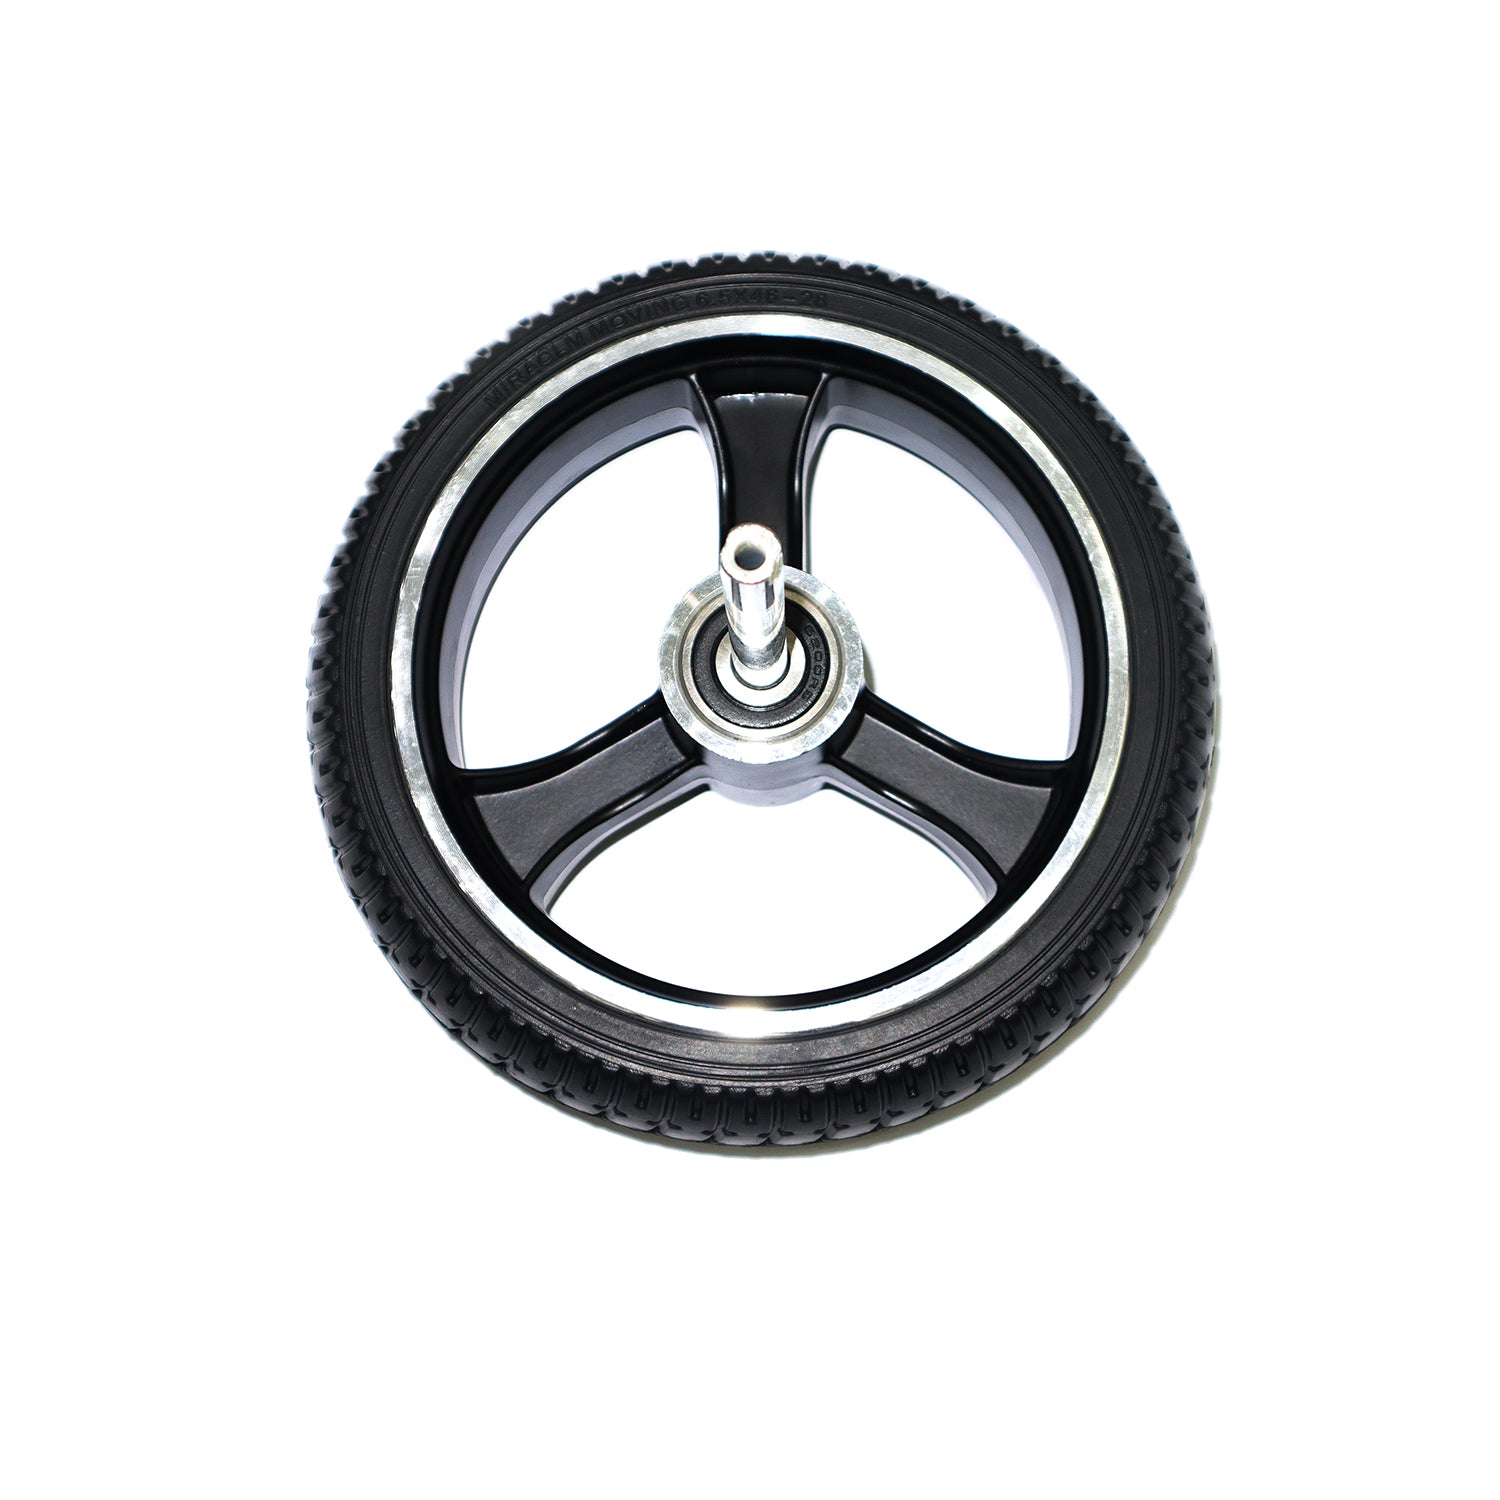 Replacement Teen Scooter Front or Back Wheel